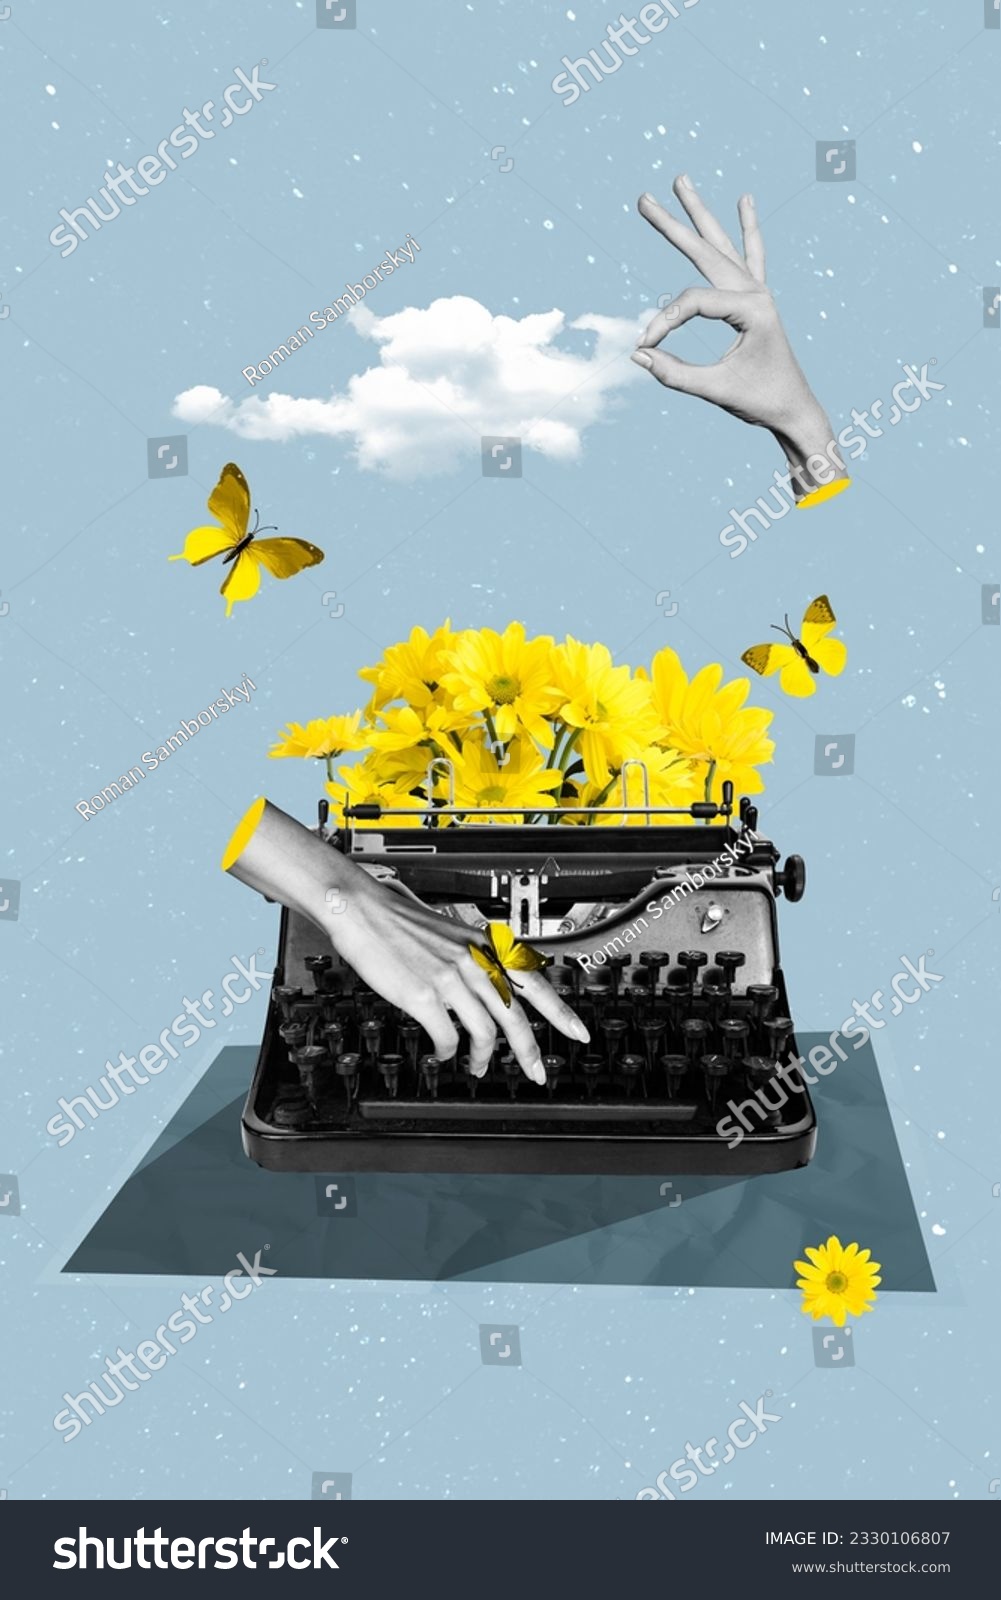 Collage 3d image pinup pop artwork of hands typing copywriter mechanical vintage keyboard yellow bouquet daisy isolated on blue background #2330106807